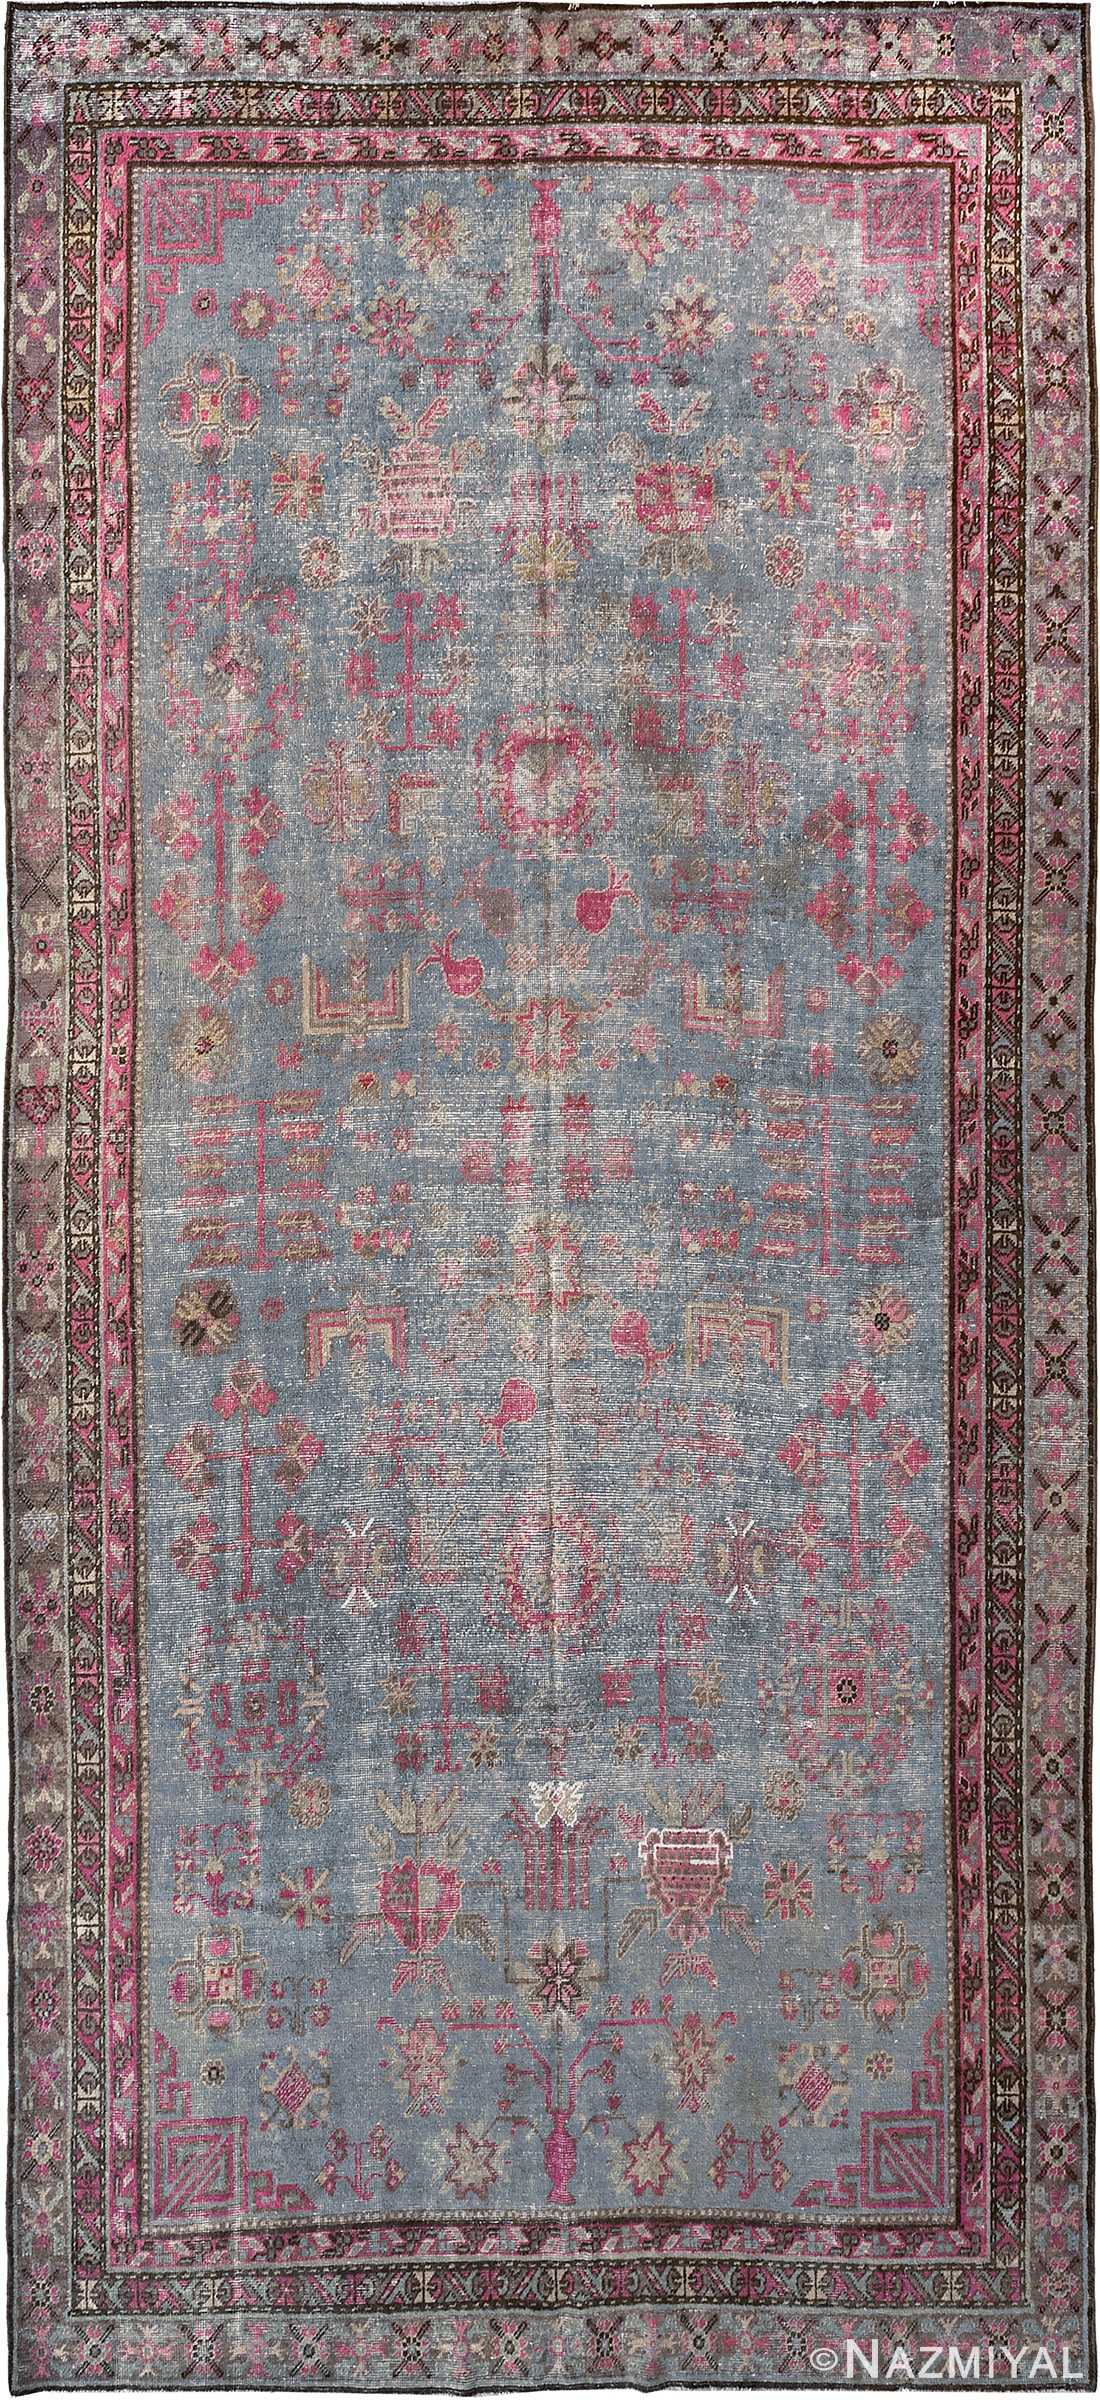 Antique Blue And Purple Shabby Chic Khotan Rug #90048 by Nazmiyal Antique Rugs